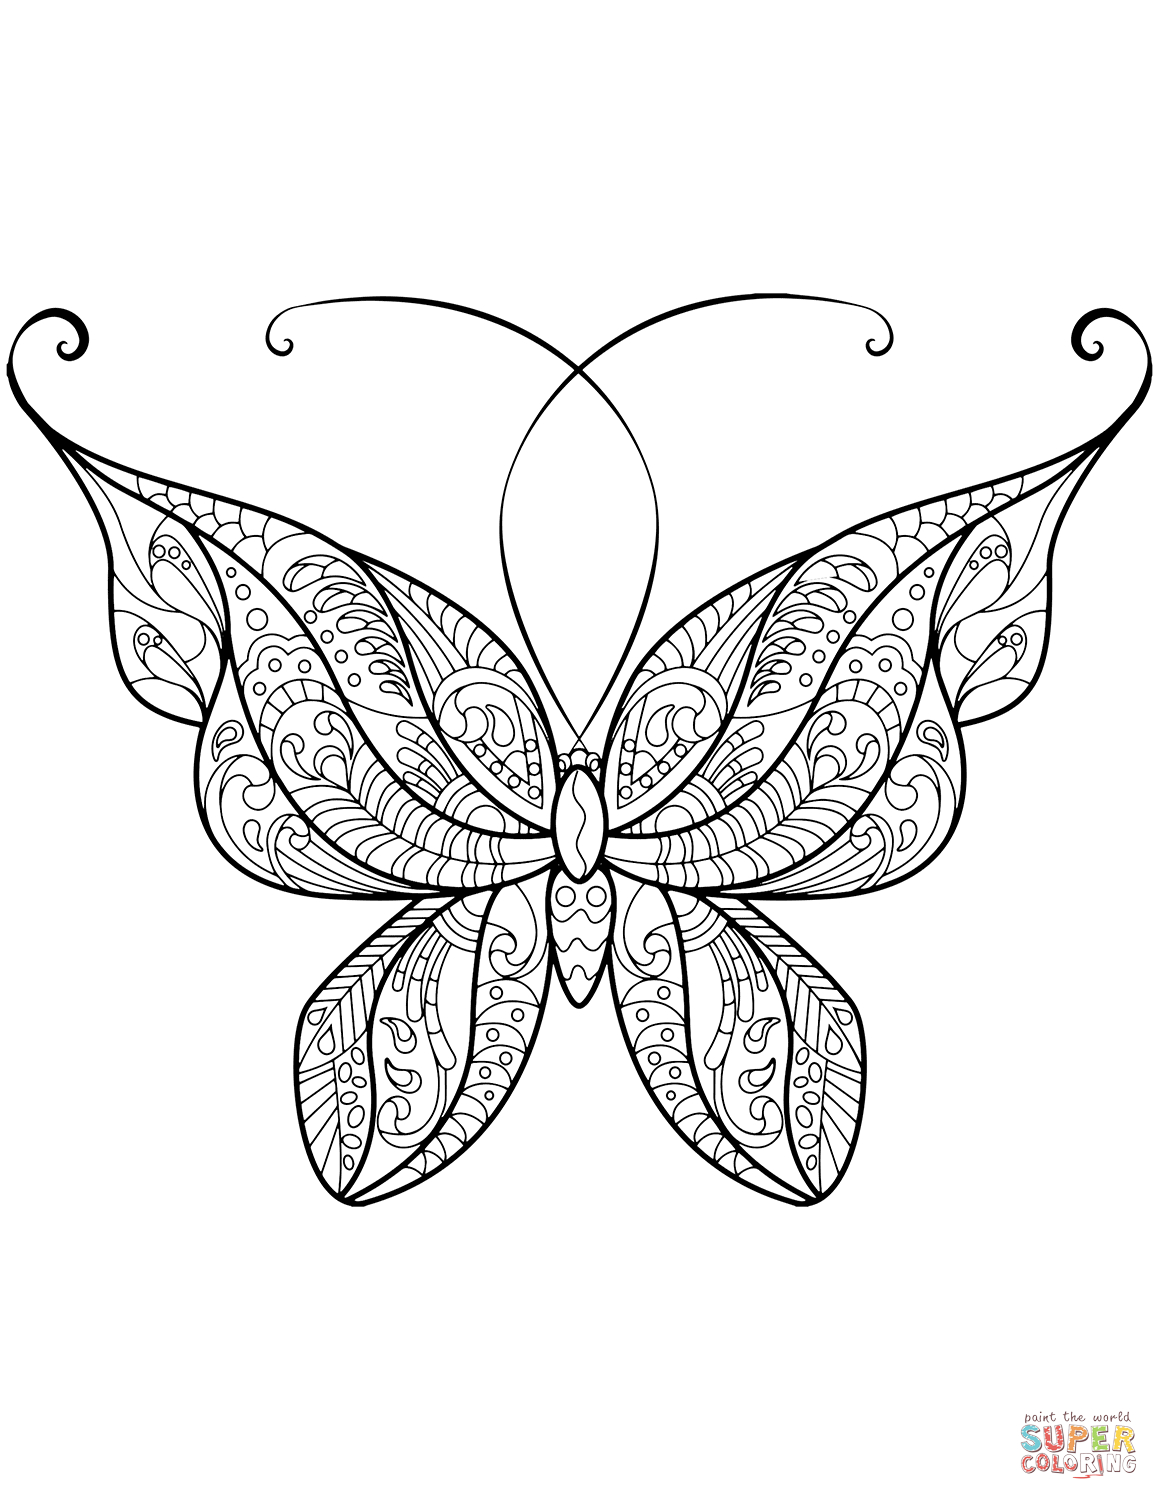 Butterfly Outline Coloring Page Zentangle Butterfly Coloring Page Free Printable Coloring Pages